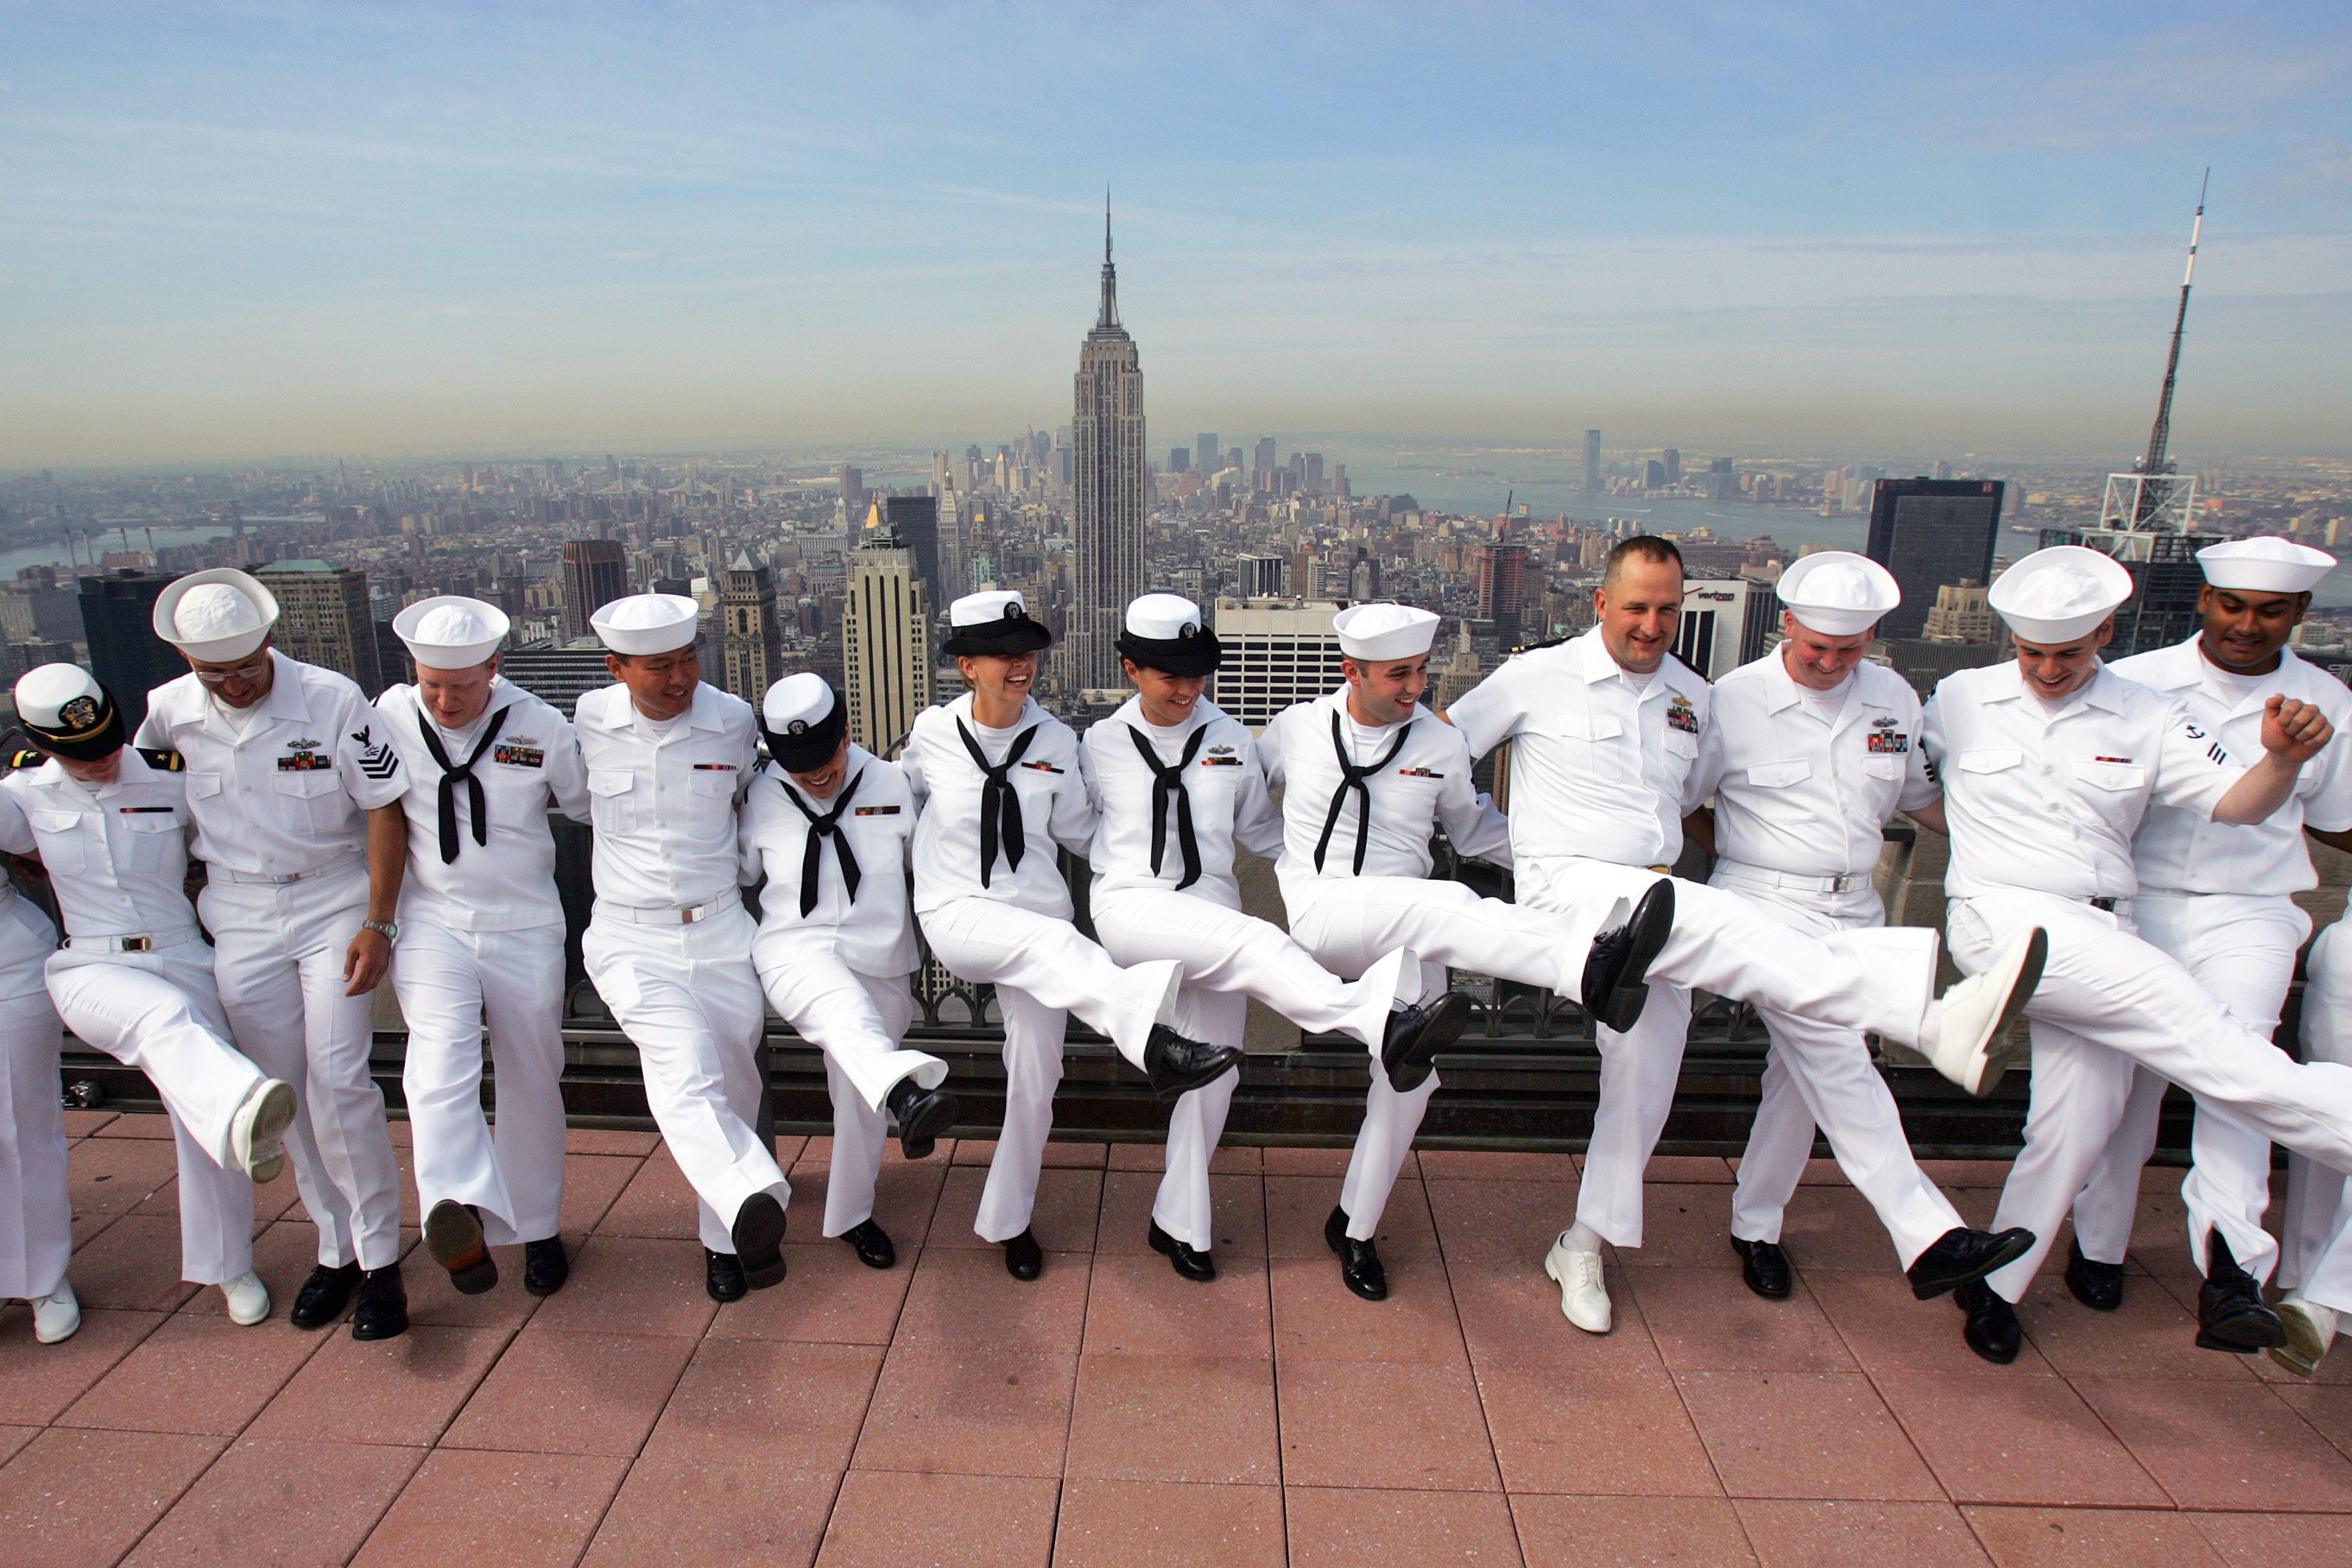 Celebrate Fleet Week With These 4 Amazing Events in NYC